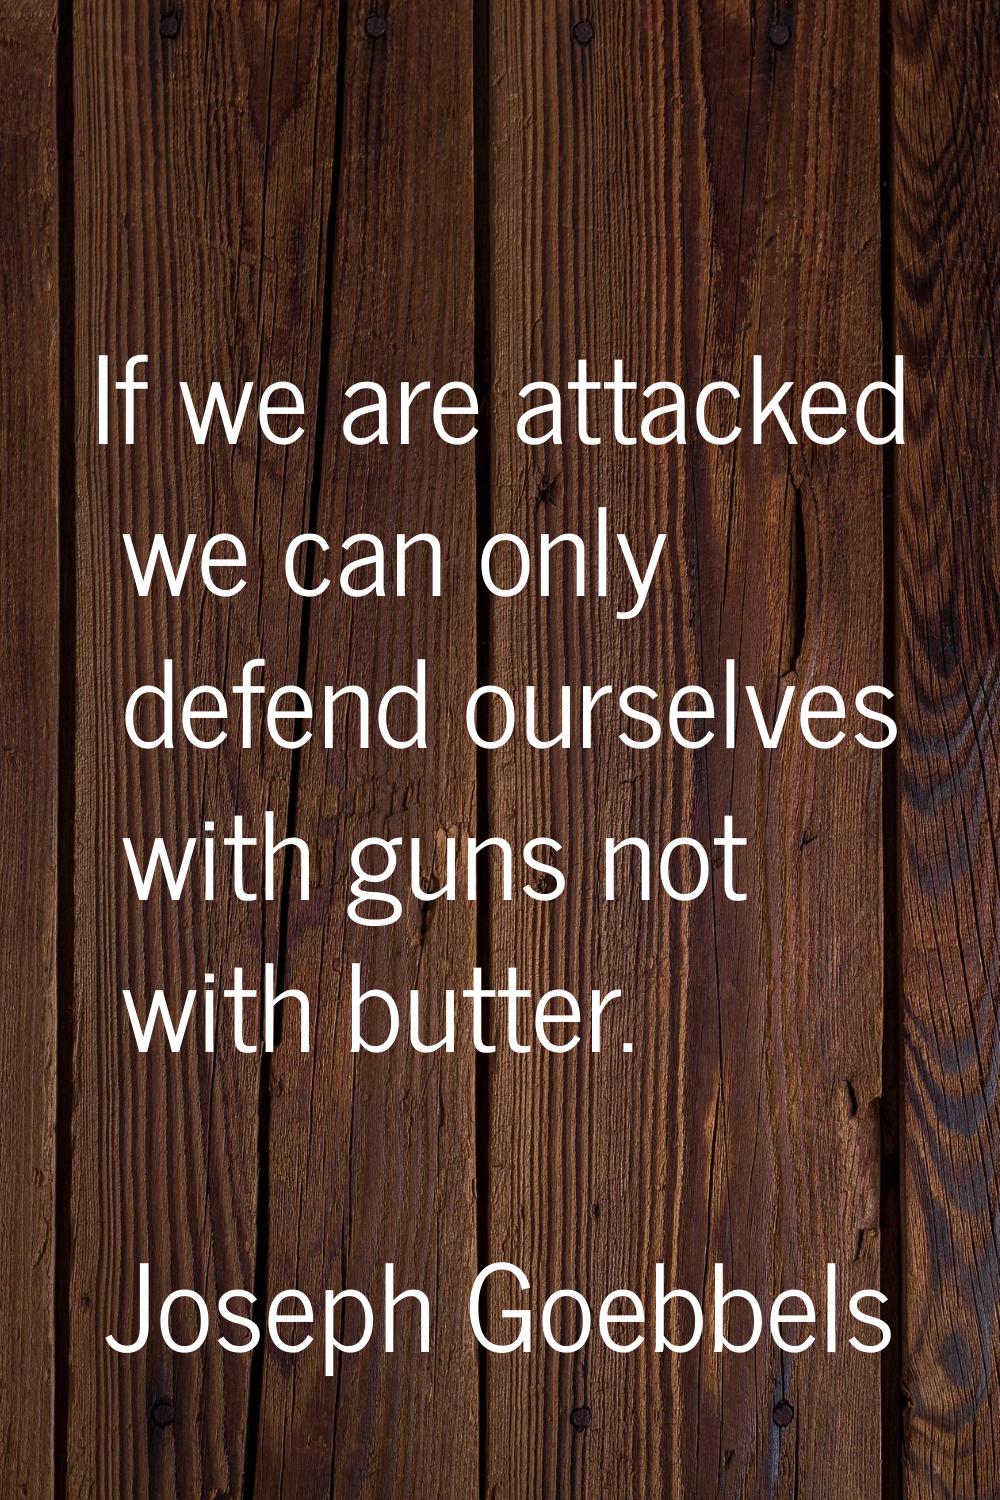 If we are attacked we can only defend ourselves with guns not with butter.